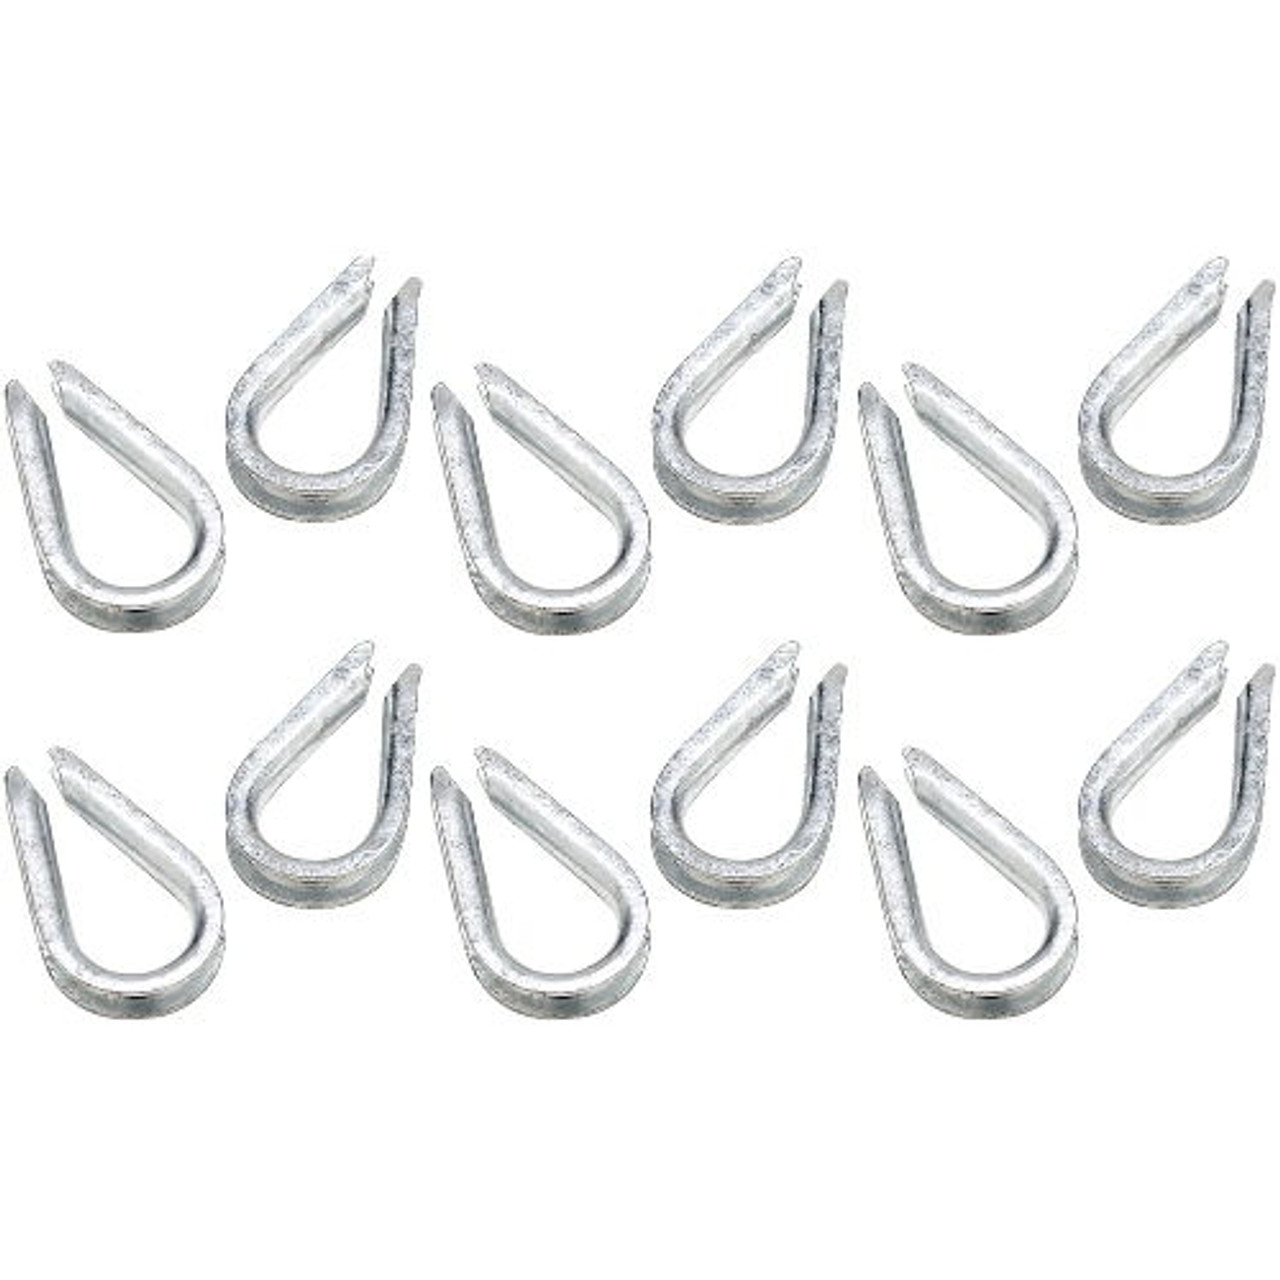 12 Pack of 5/8 Inch Galvanized Wire Rope Anchor Line Thimbles for Boats